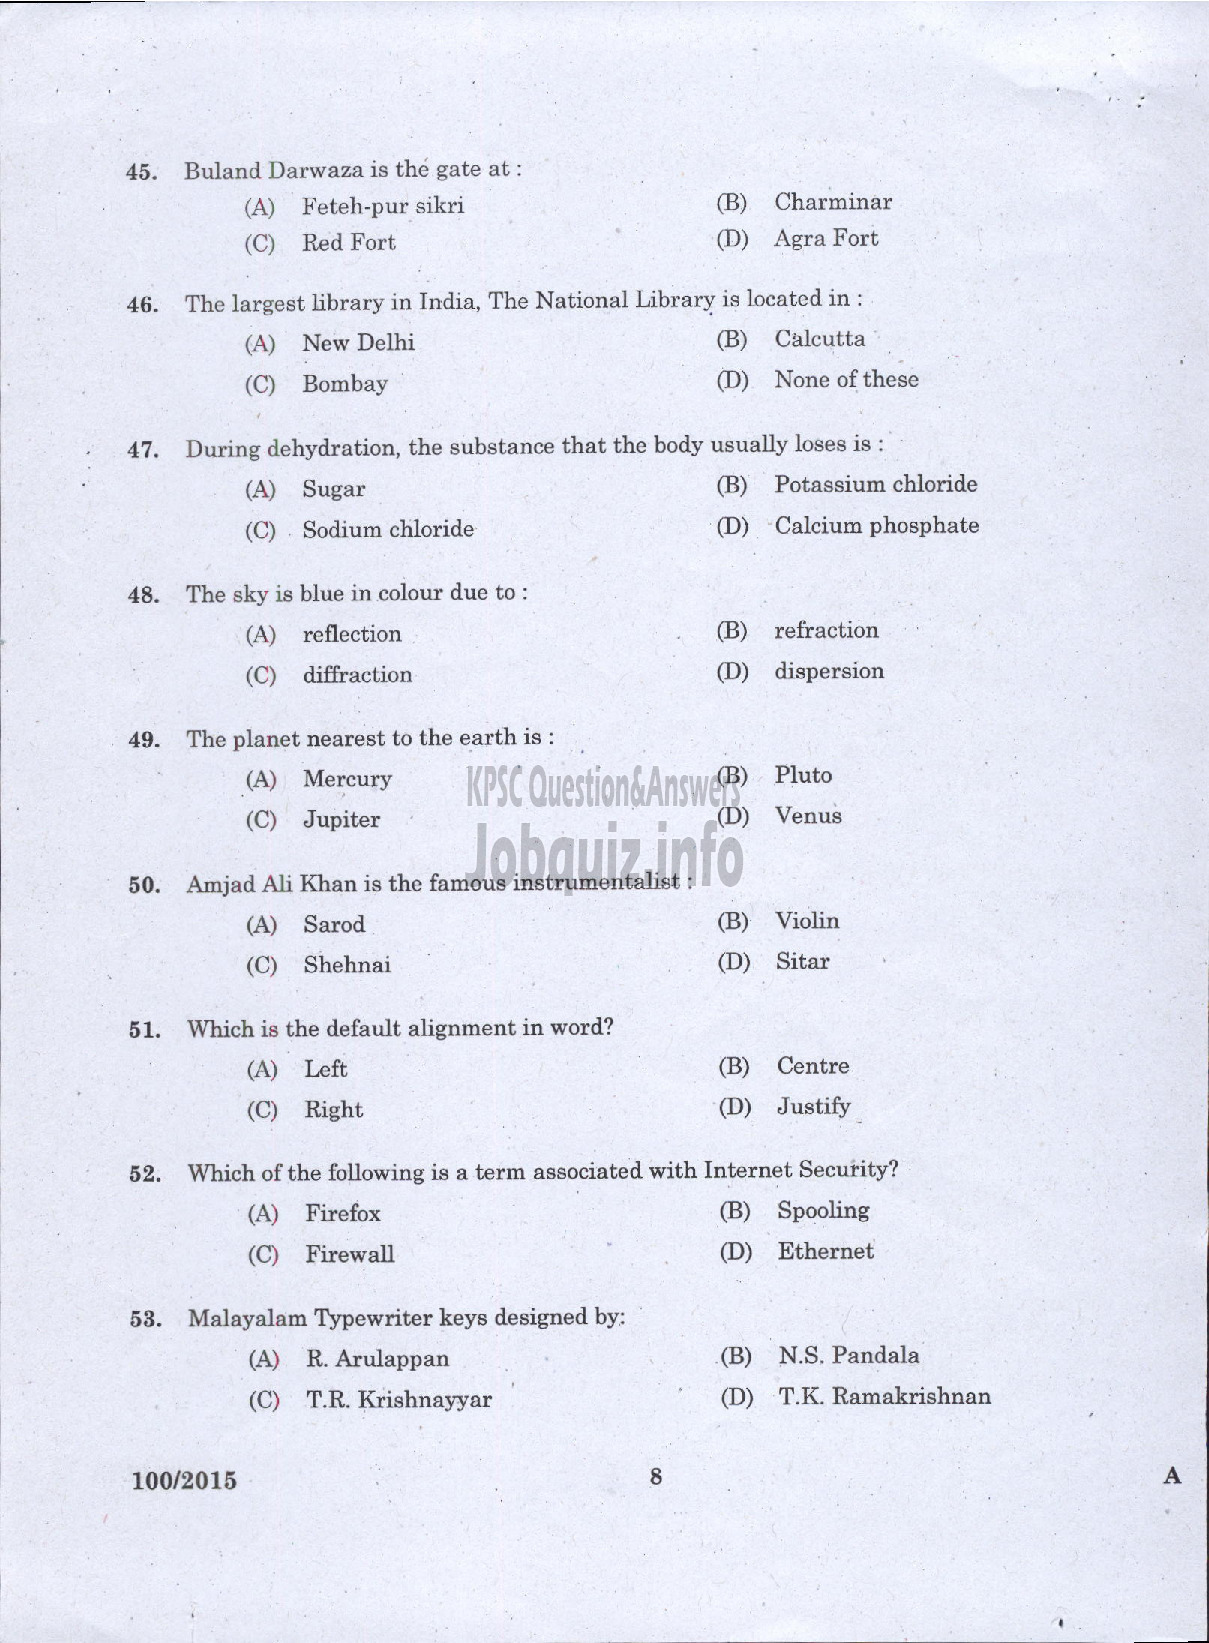 Kerala PSC Question Paper - TYYPIST GRADE II / STENO TYPIST / CLERK TYPIST / TYPIST KERALA STATE HOUSING BOARD / KERALA SHIPPING AND INLAND NAVIGATION CORP LTD / VARIOUS / KERALA ELECTRICAL AND ALLIED ENGINEERING COMPANY LTD-6